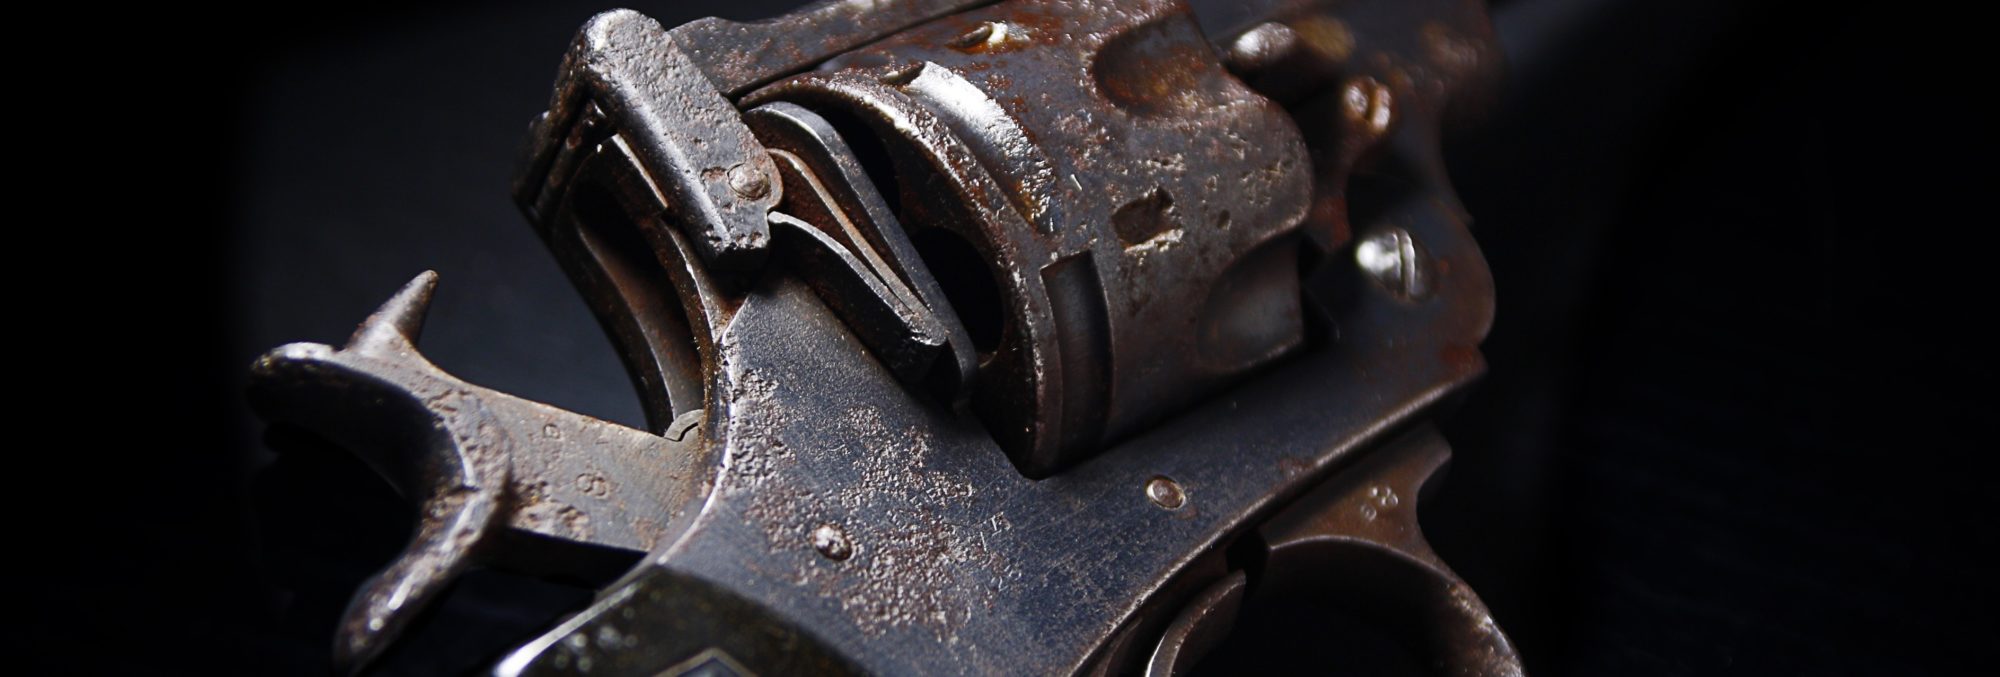 Close-up of an old, rusted revolver on a dark background, highlighting the detailed texture and mechanical parts of the firearm.